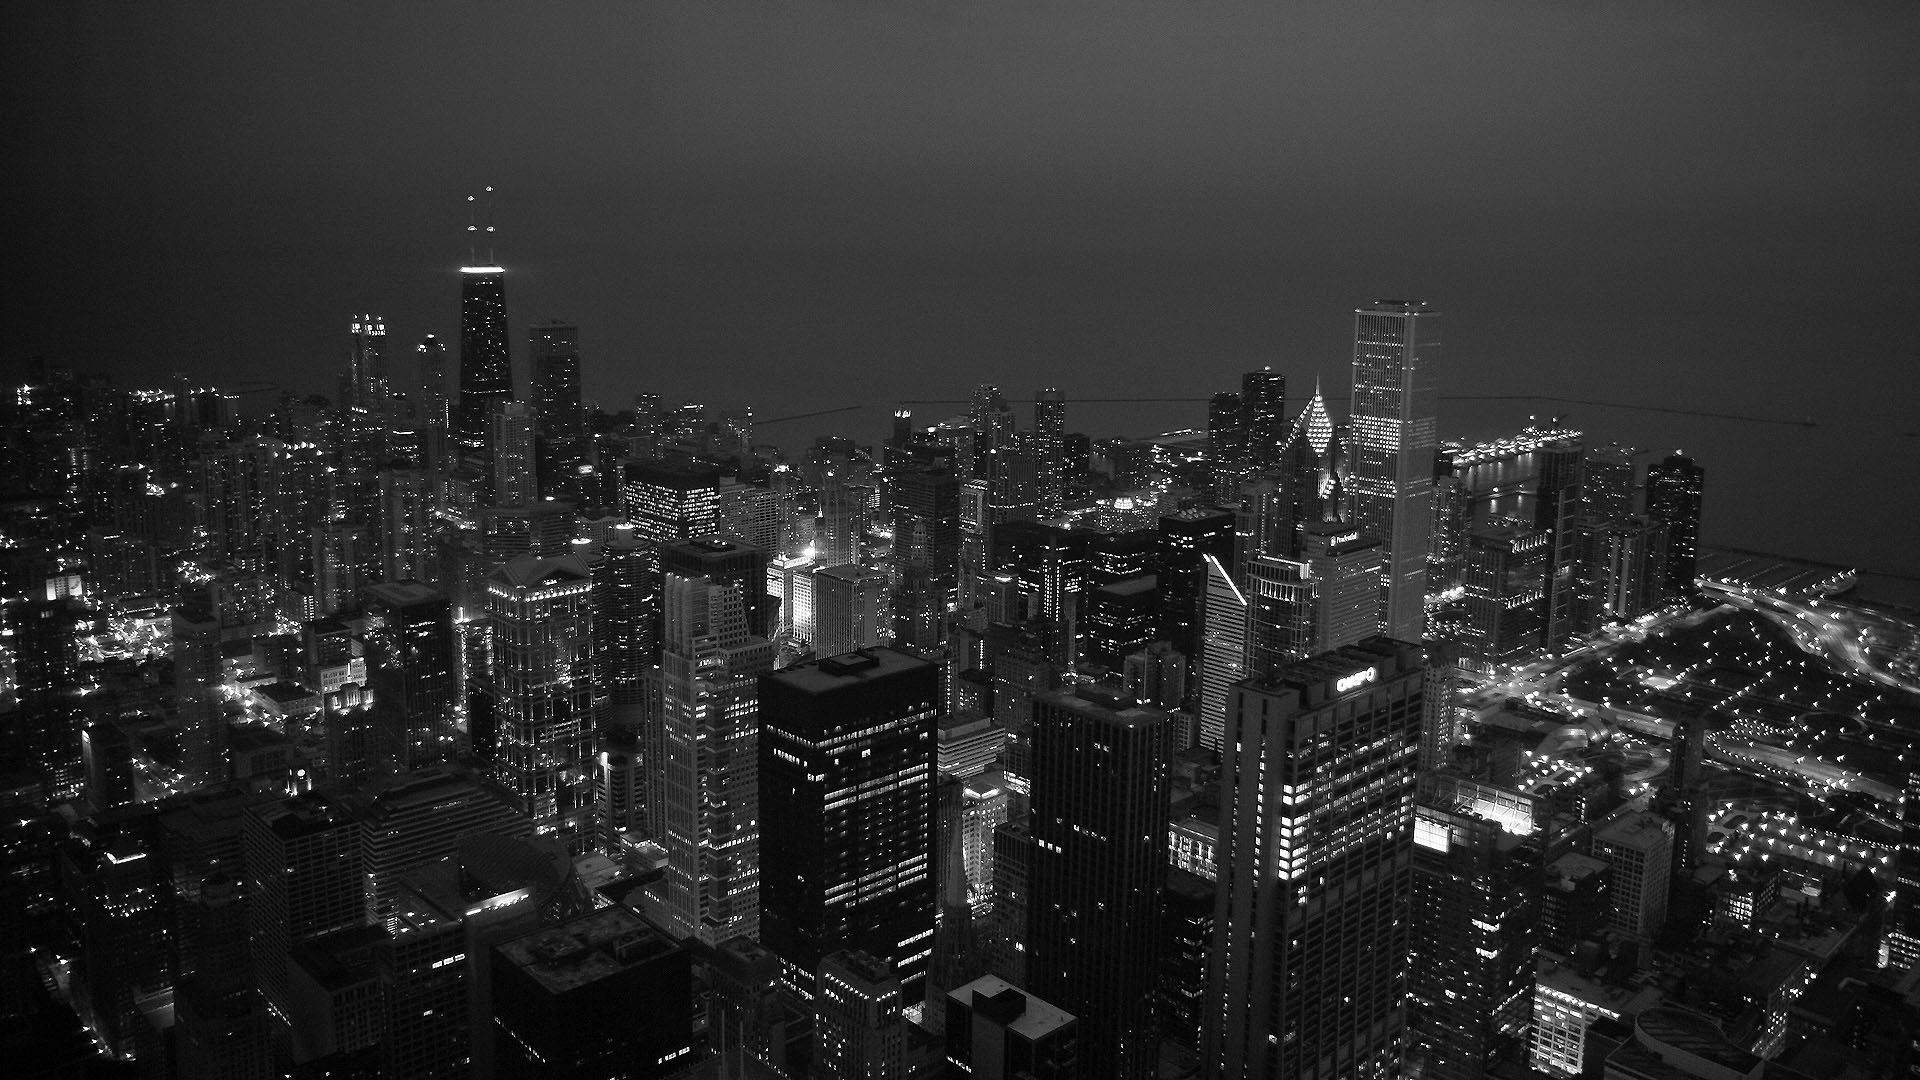 Metropolitan Sophistication - A Stunning Black And White View Of A City Skyline. Background